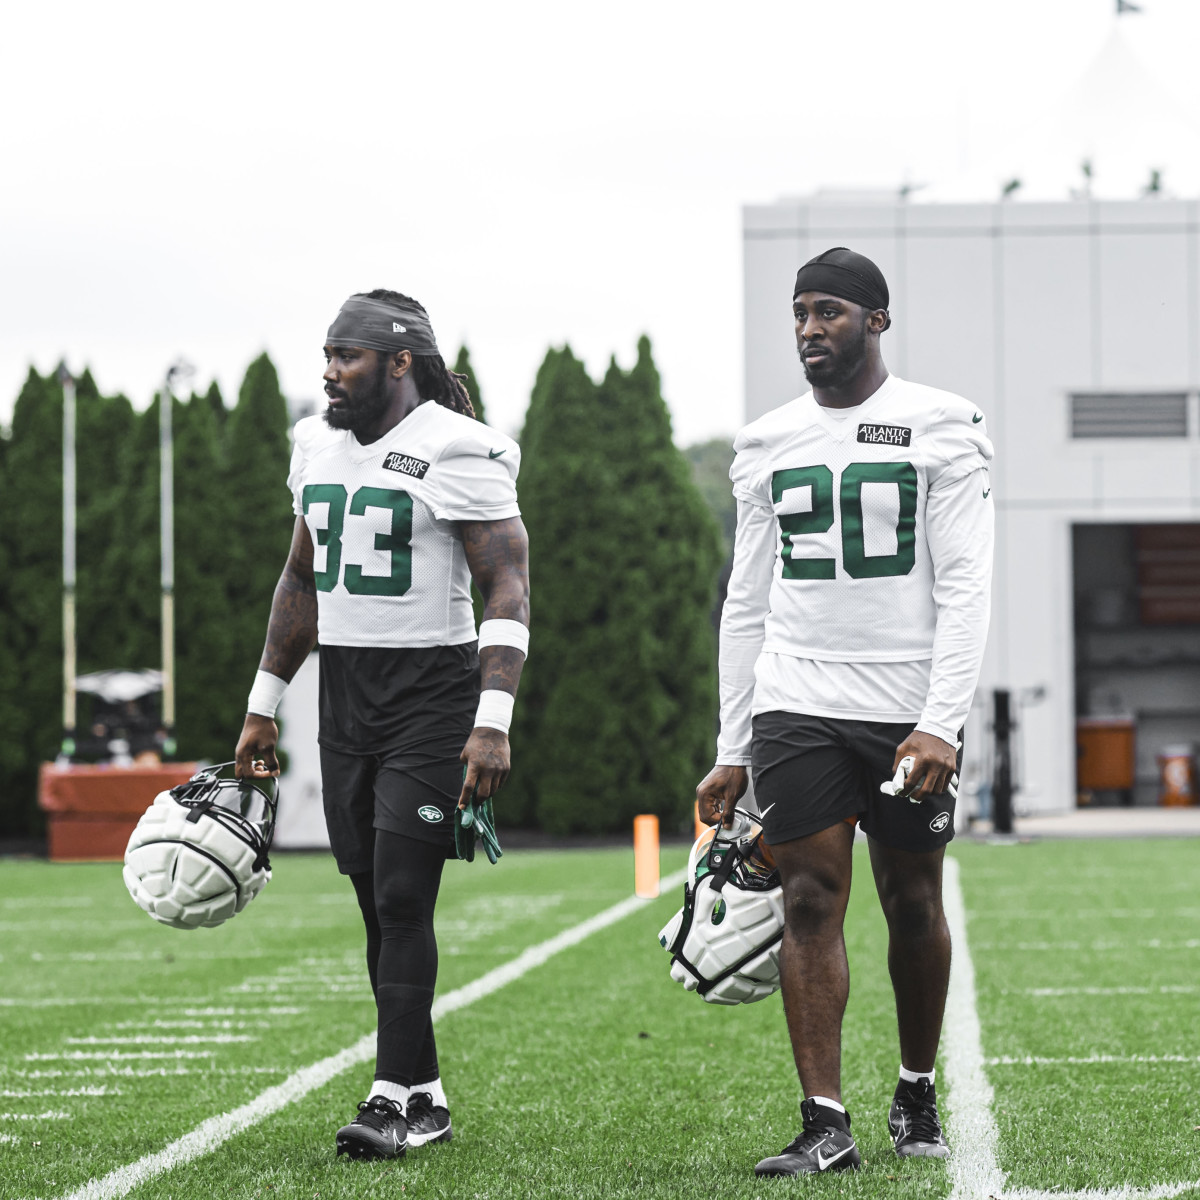 Jets' running backs Dalvin Cook (33) and Breece Hall (20) in Florham Park